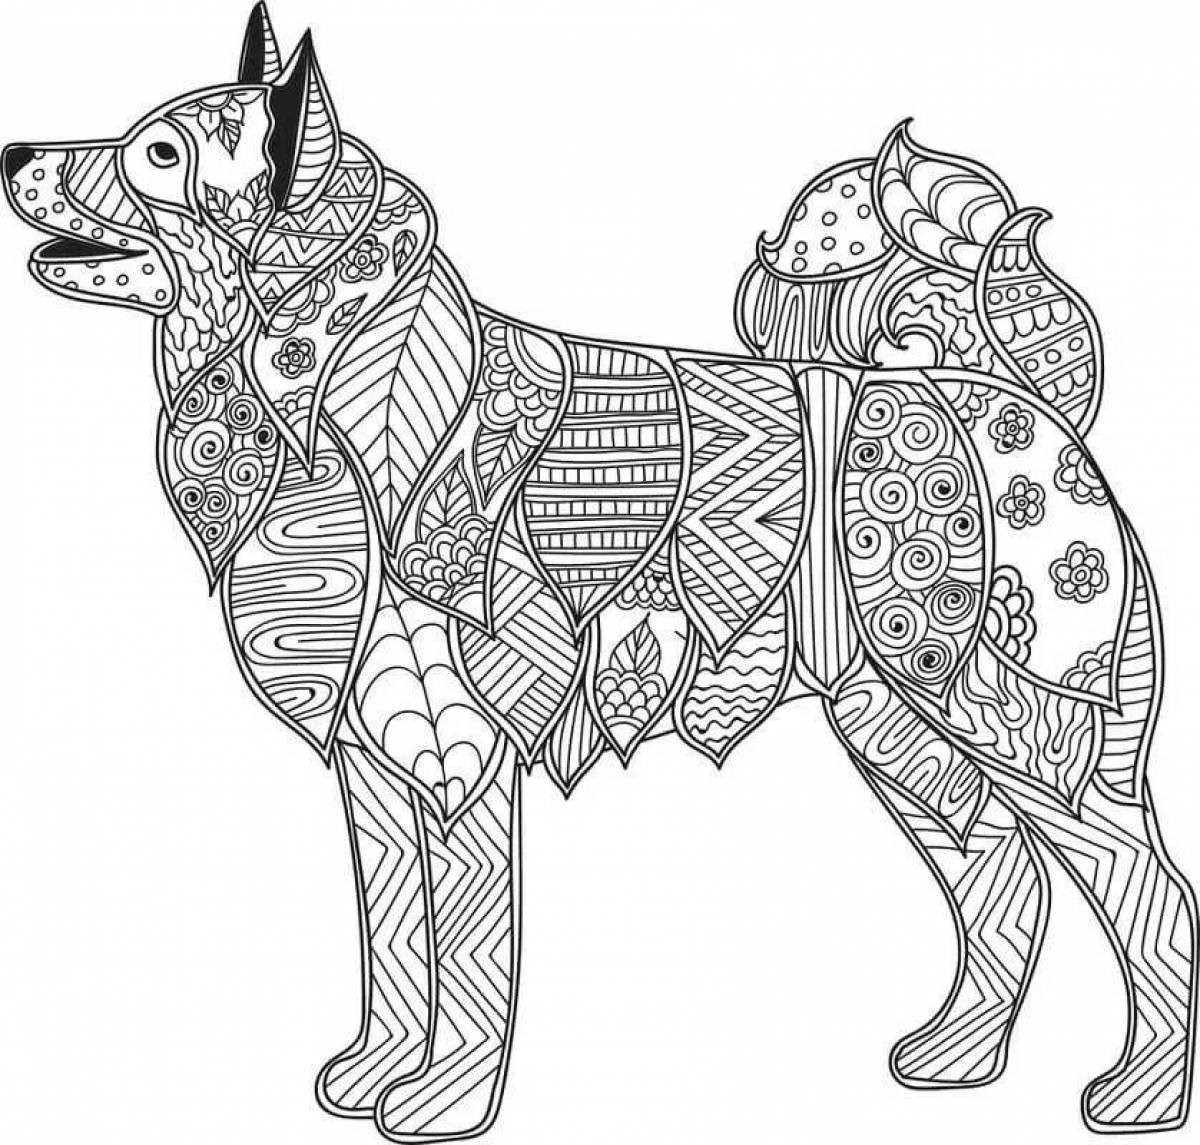 Happy dogs coloring pages for adults